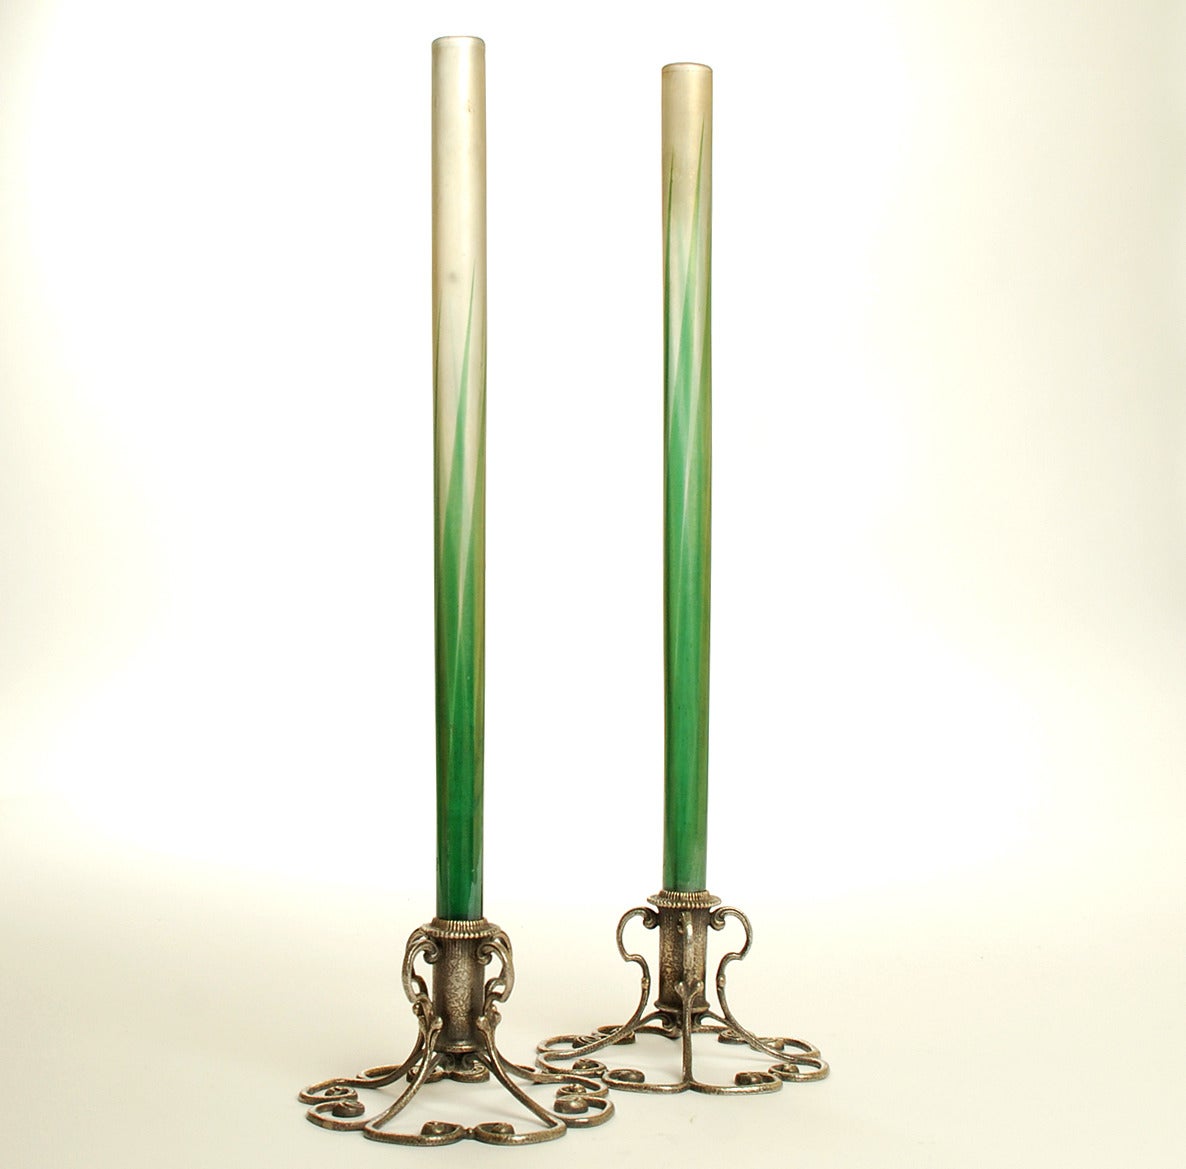 Pair of Stunning Antique Tiffany 'Favrile' Glass Vases, circa 1900 For Sale 1